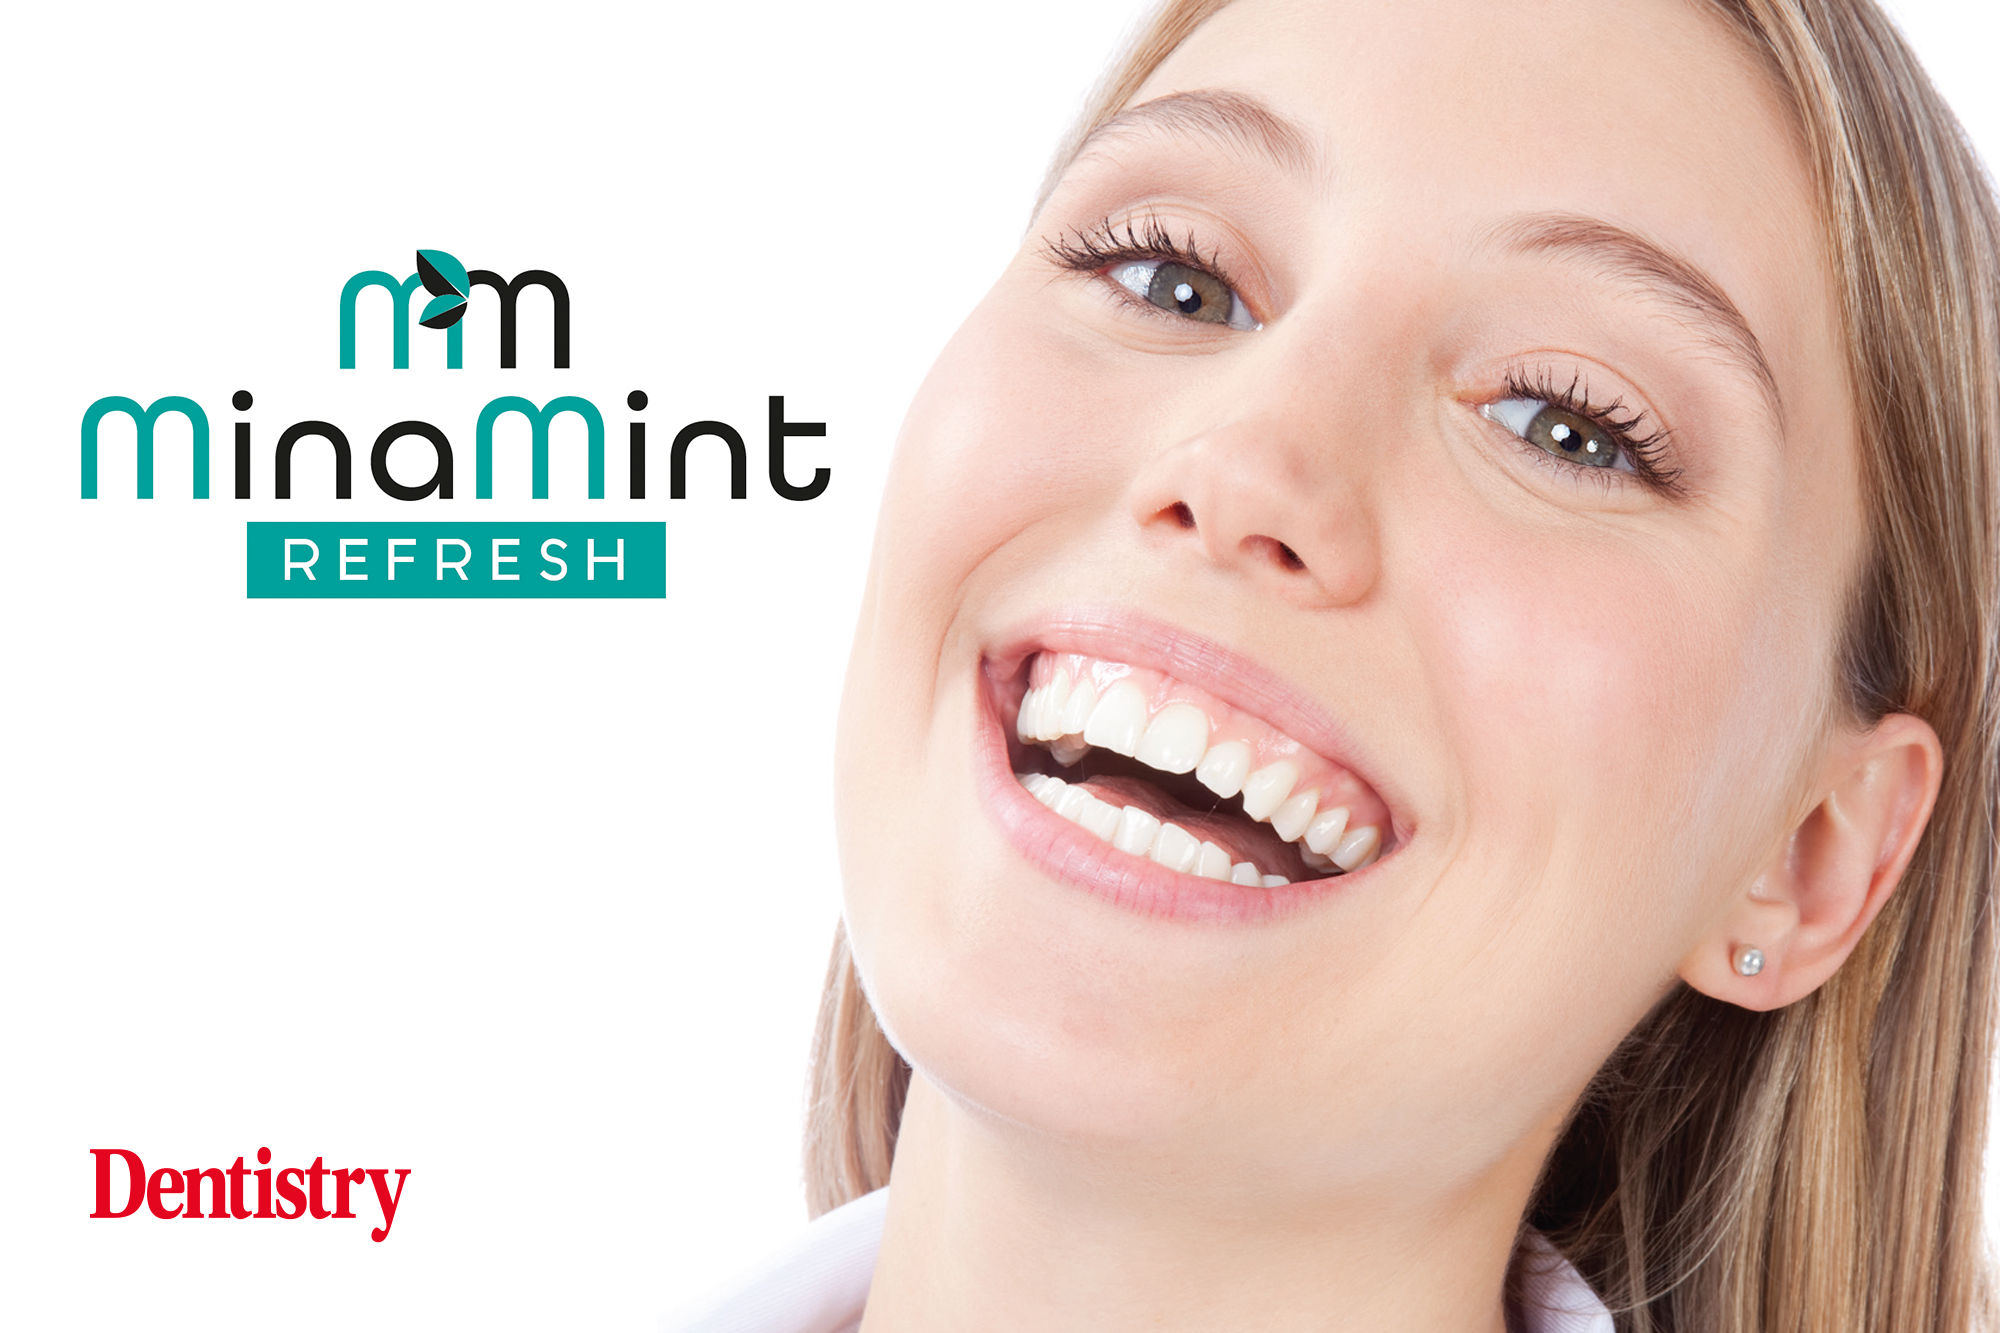 Minamint Refresh chairside mouth rinse